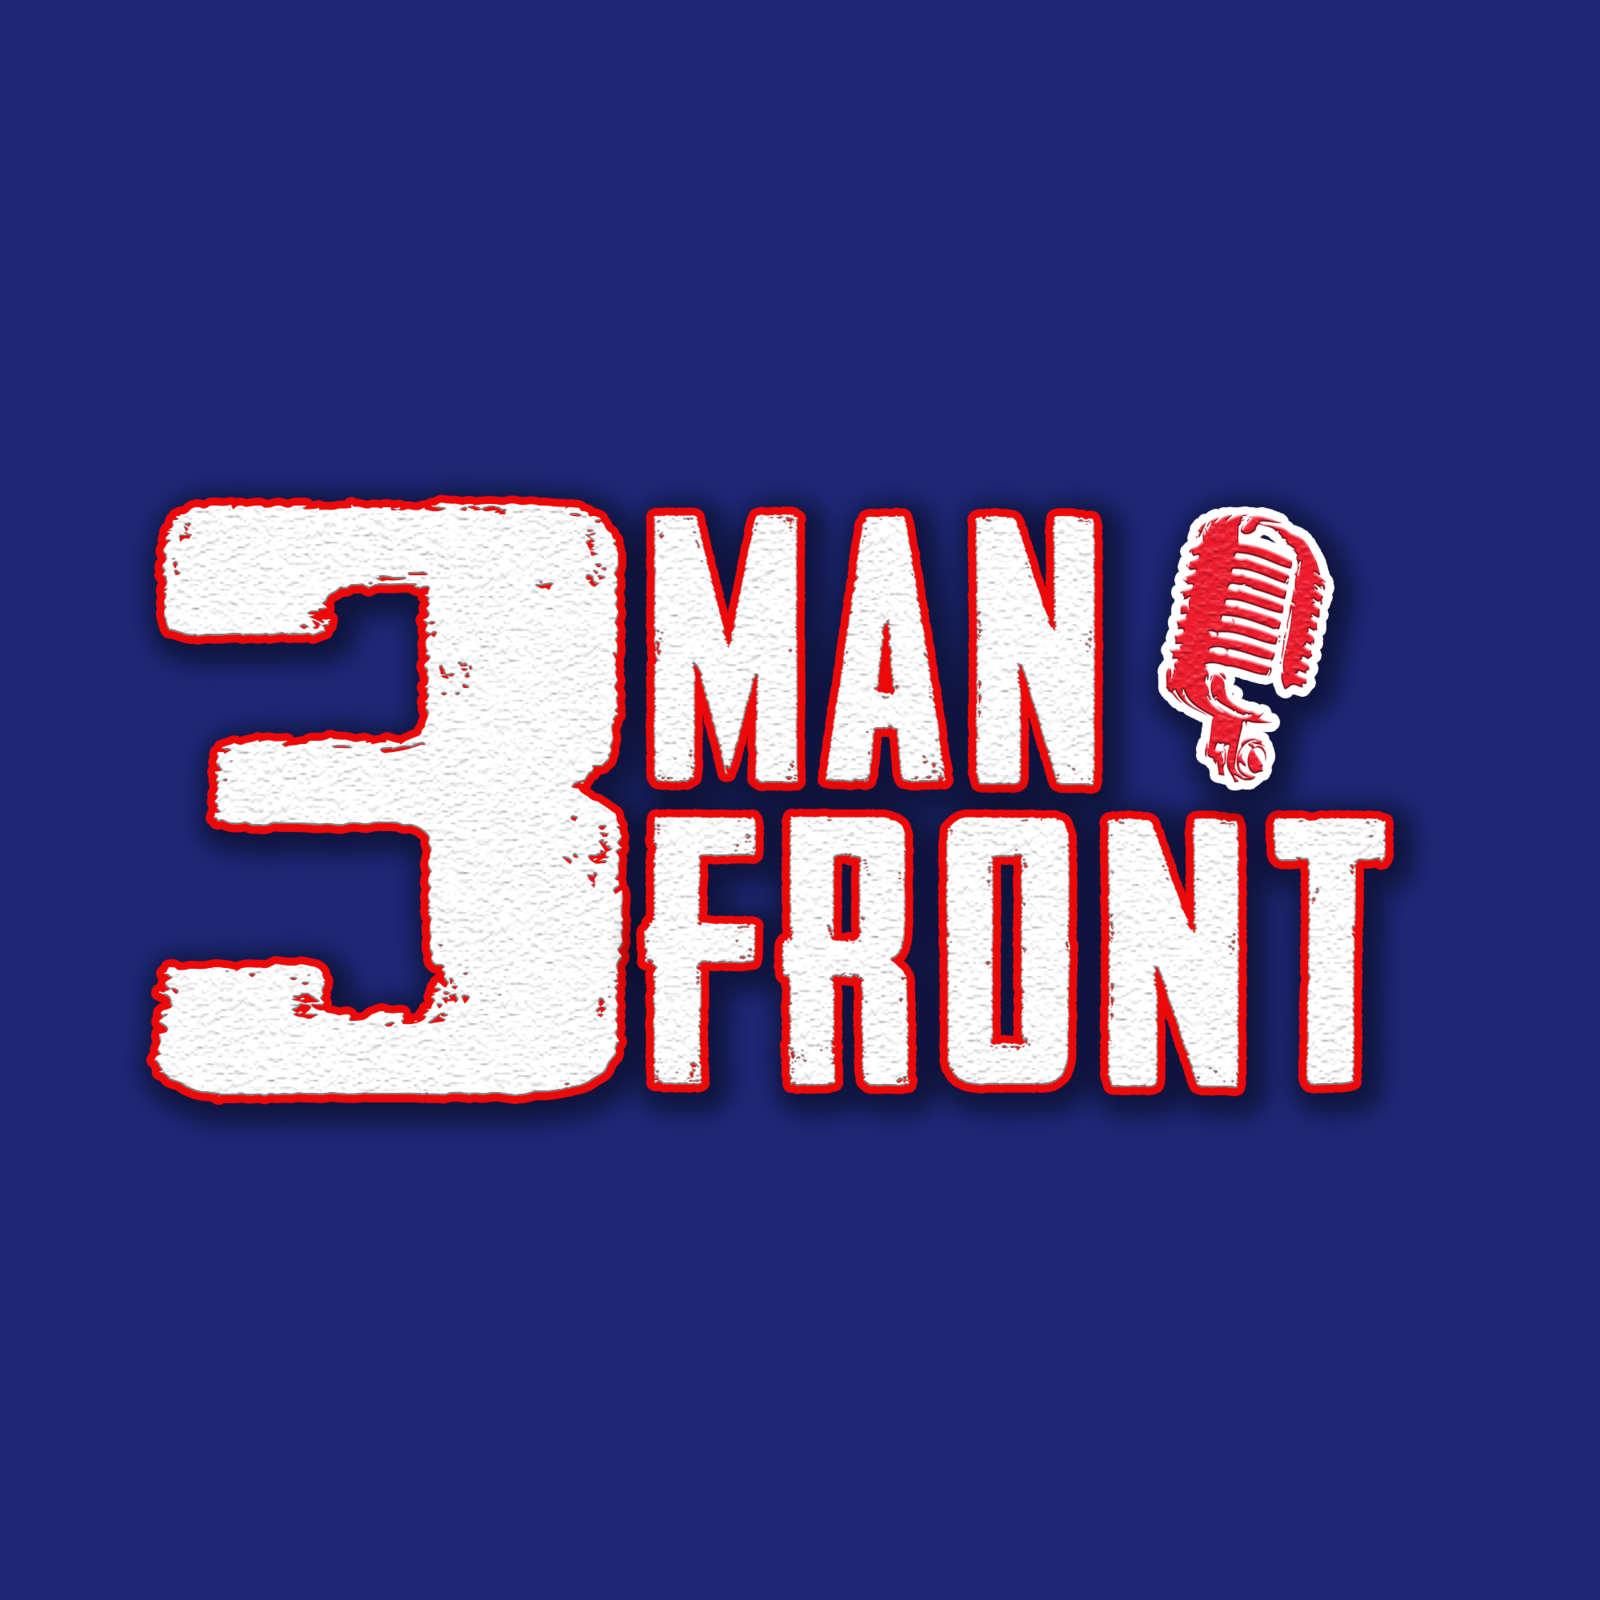 6-25-24 3 Man Front Hour 1: Tennessee baseball wins the Natty, Mike Griffith & toughest CFB environnments